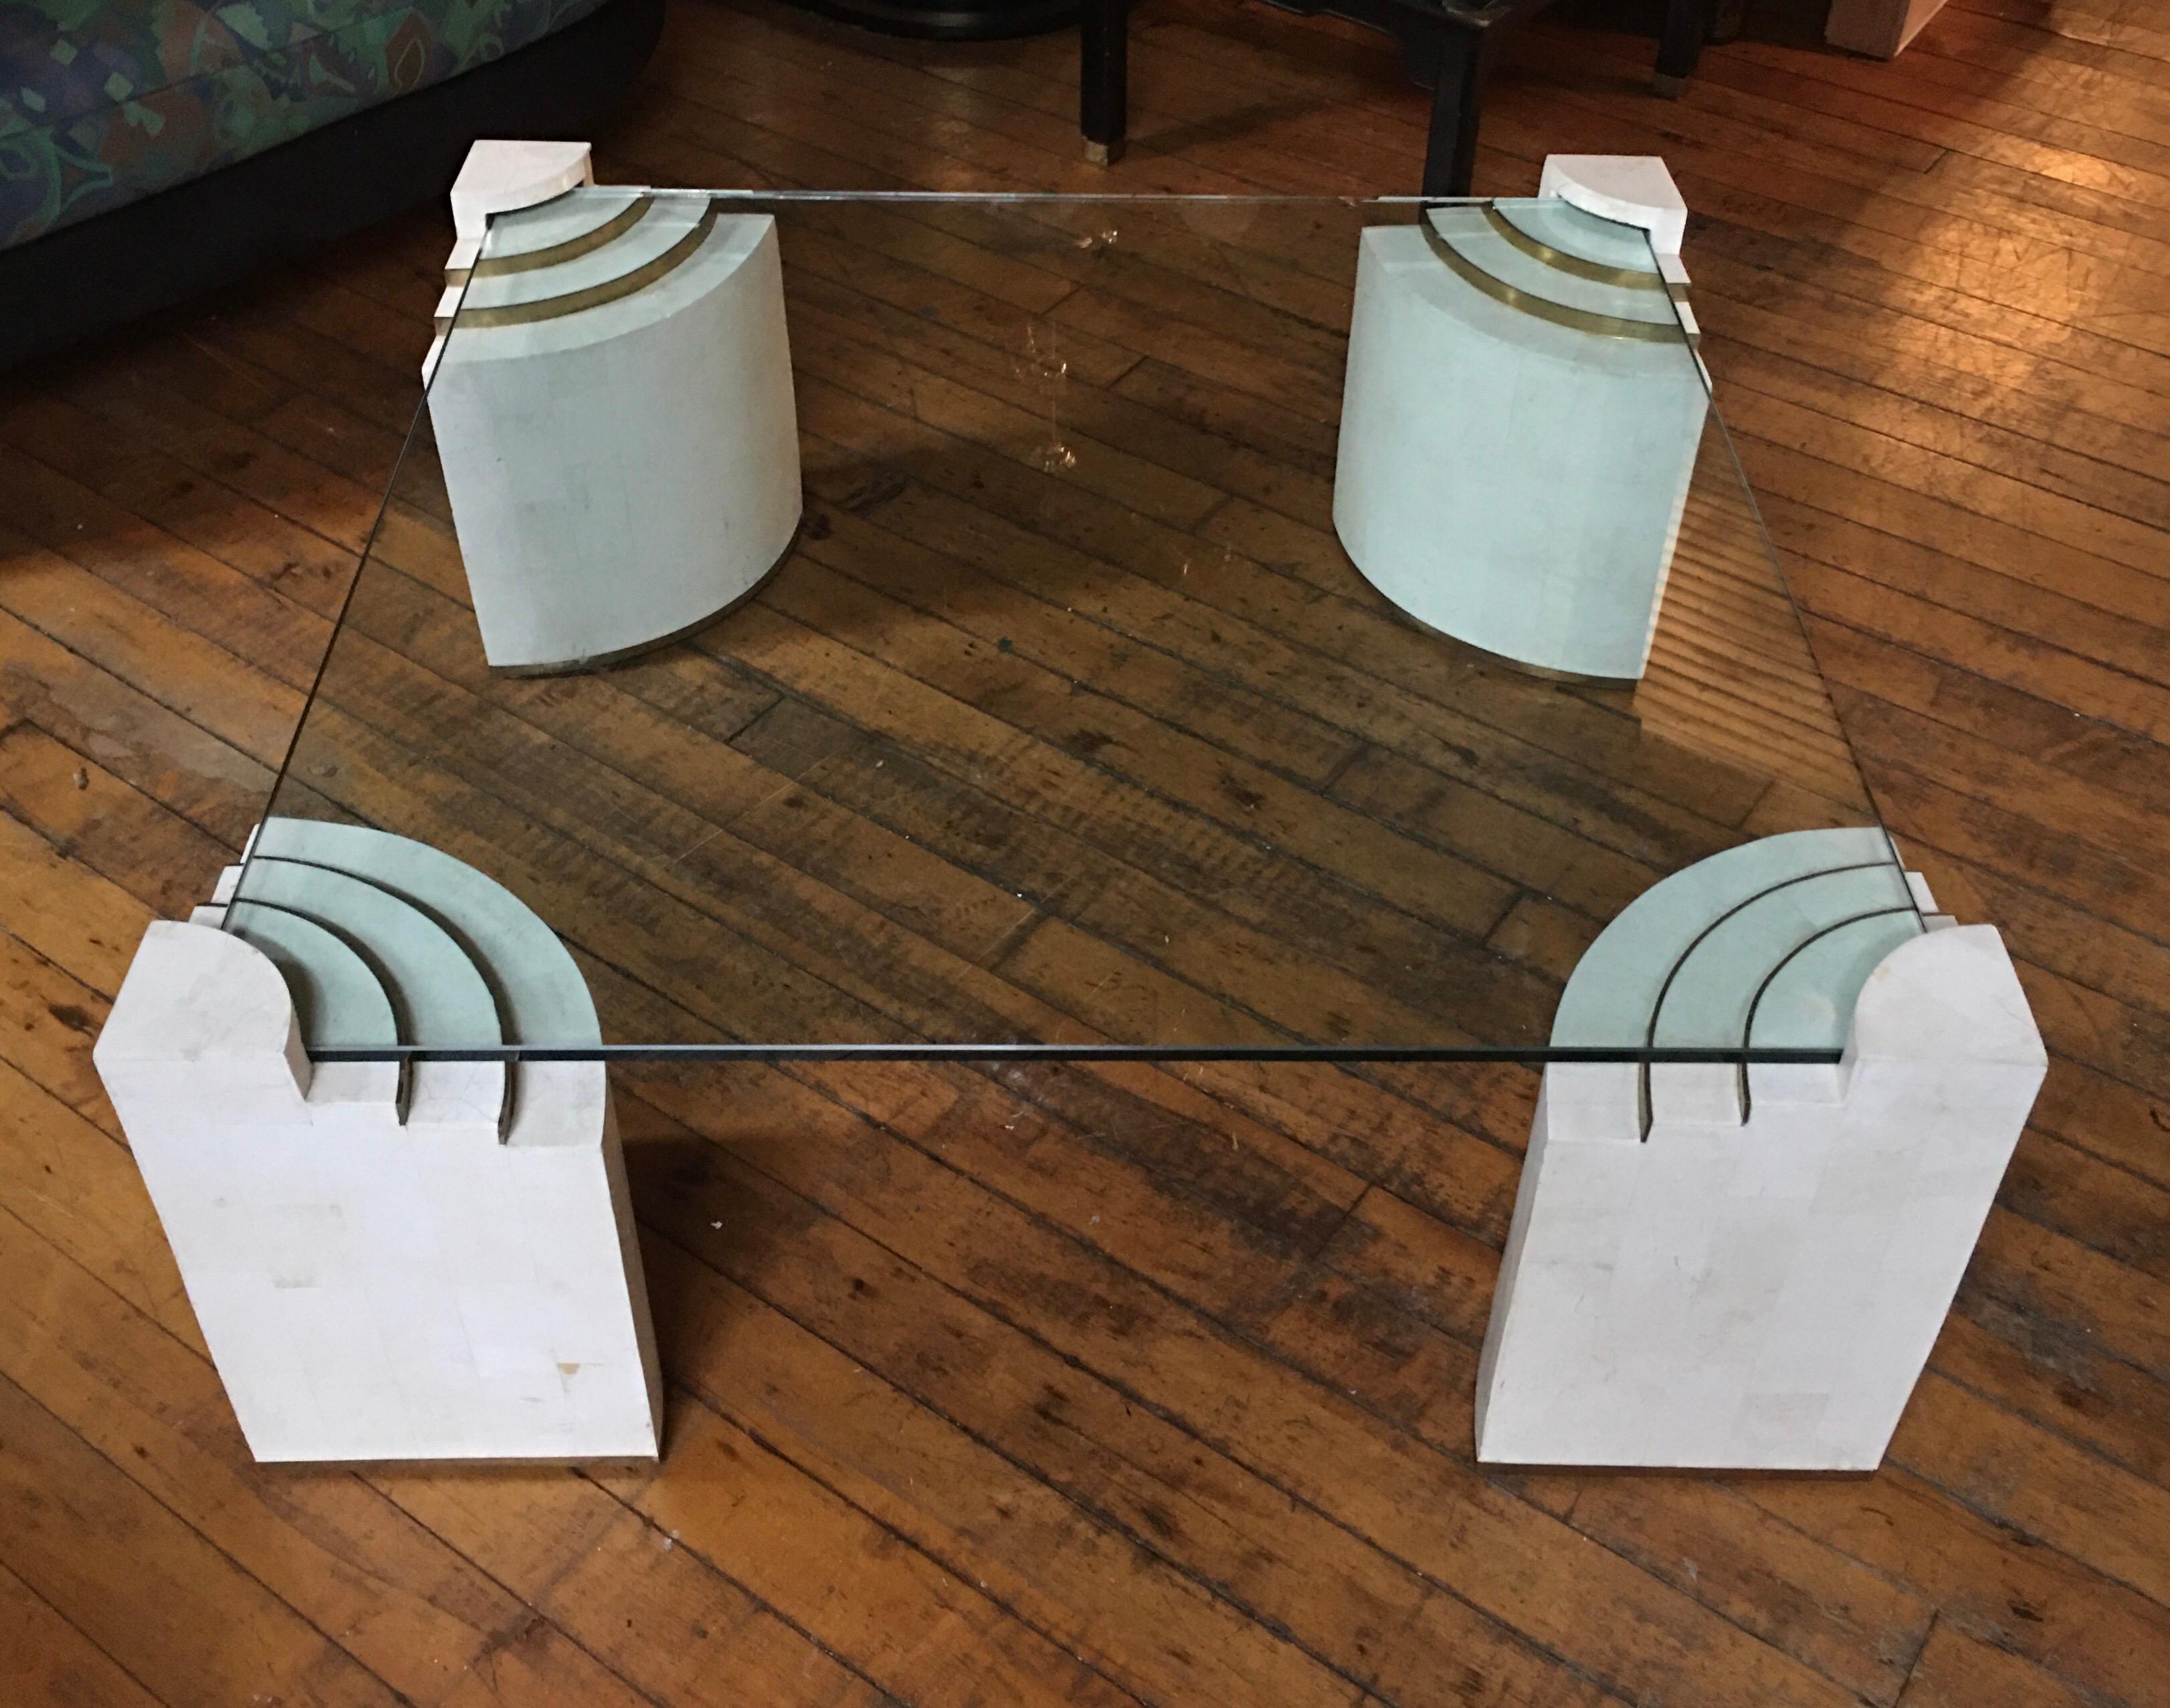 Stunning Mid-Century Modern tessellated stone coffee table designed by Robert Marcius for Casa Bique. Large square glass top is supported by four sculptural tessellated stone legs with brass band/trim detailing. In the style of Maitland Smith and in